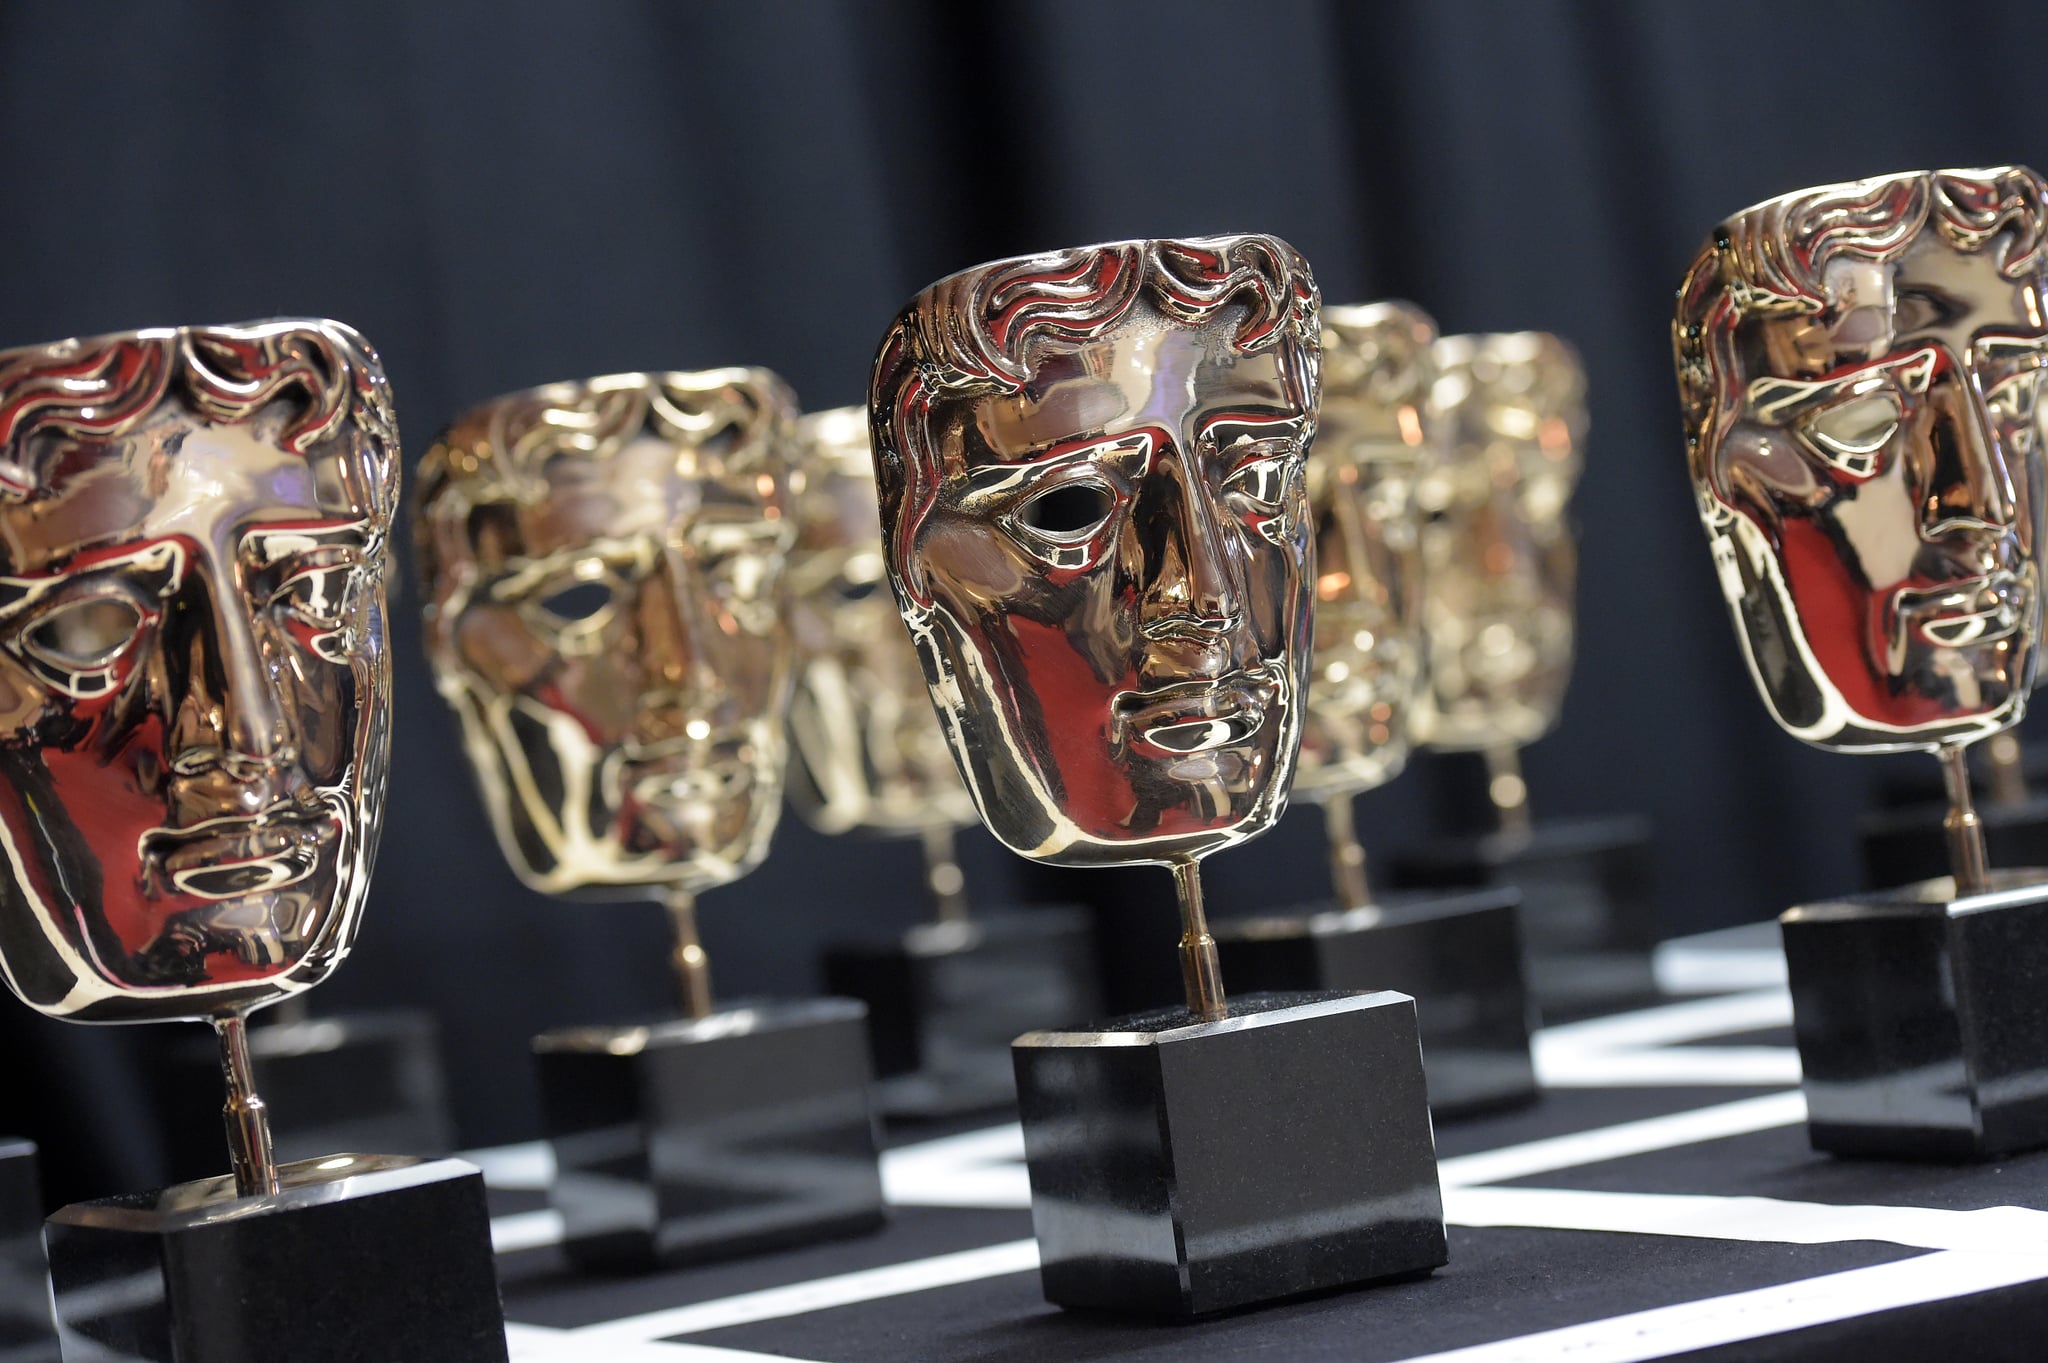 LONDON, ENGLAND - FEBRUARY 19: A general view of BAFTA Awards backstage during the EE BAFTA Film Awards 2023 at The Royal Festival Hall on February 19, 2023 in London, England. (Photo by Antony Jones/BAFTA/Getty Images for BAFTA)